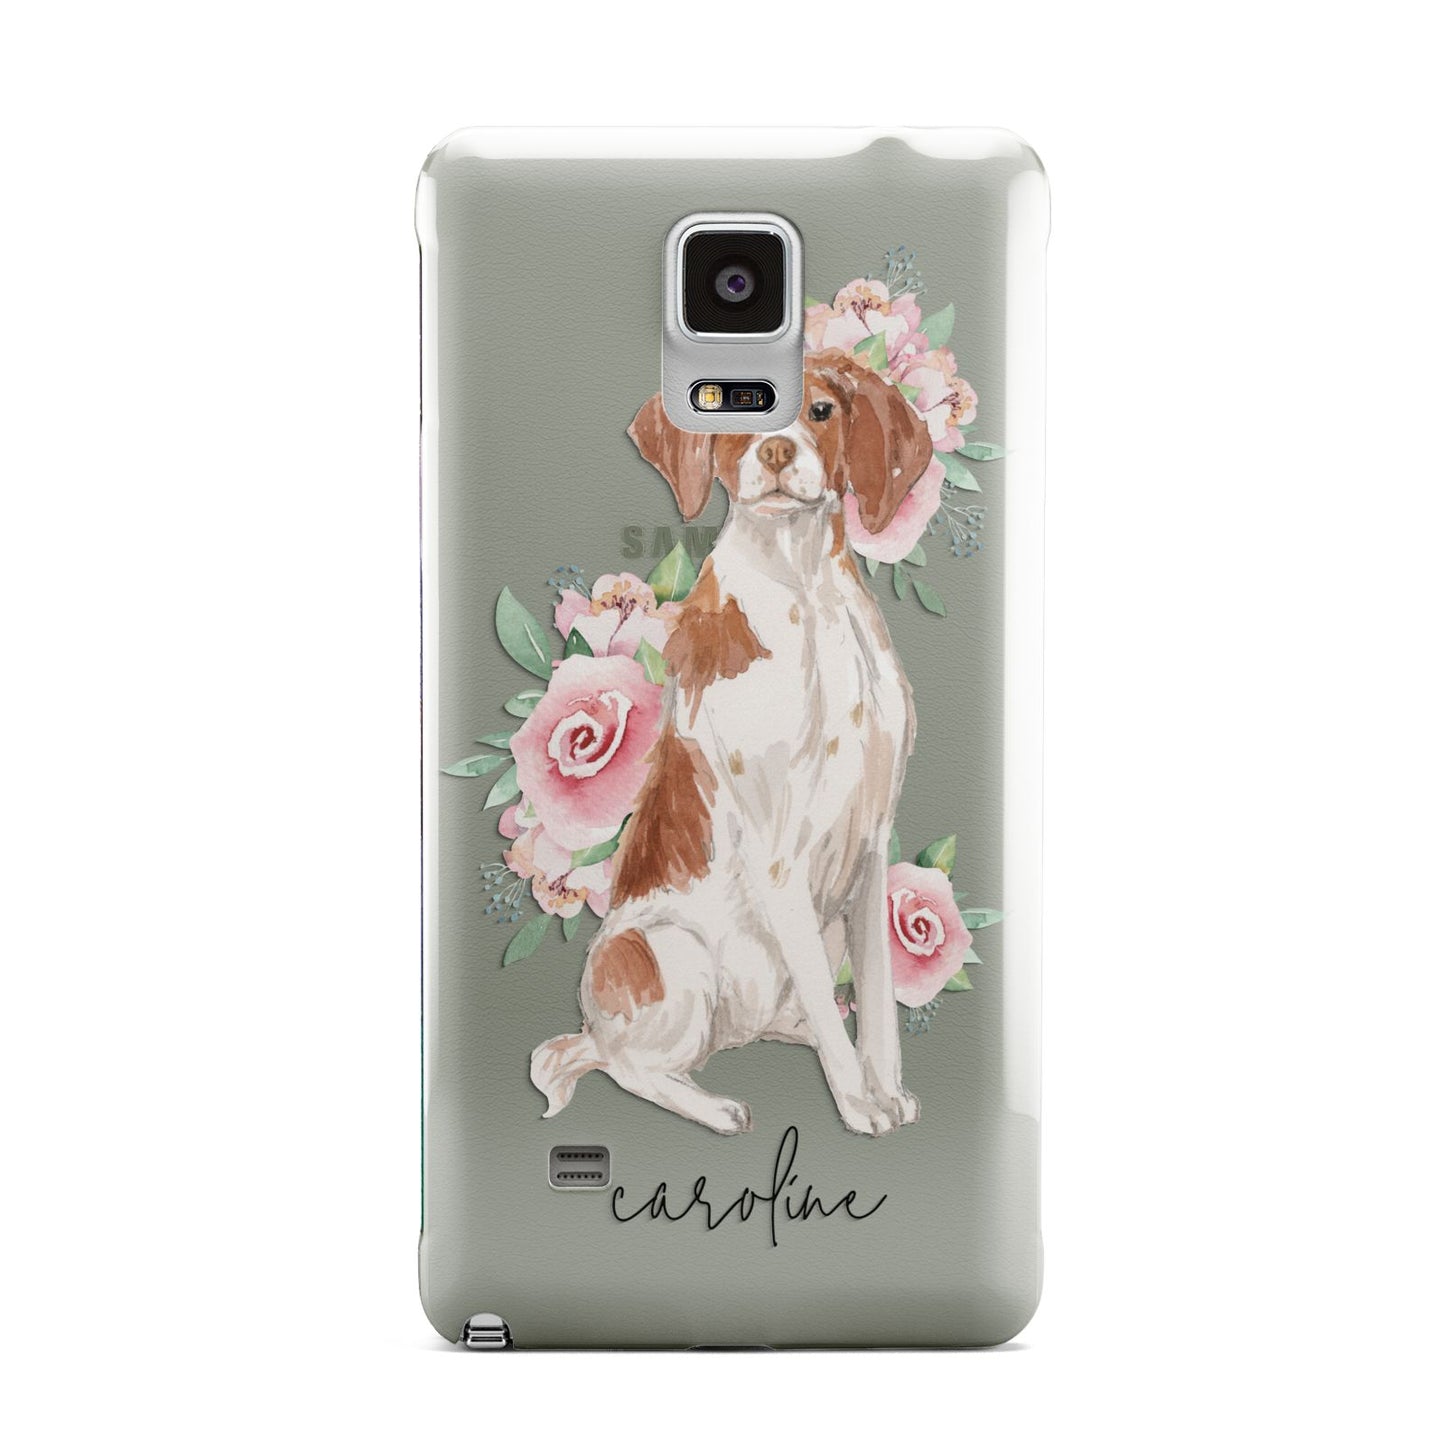 Personalised Brittany Dog Samsung Galaxy Note 4 Case